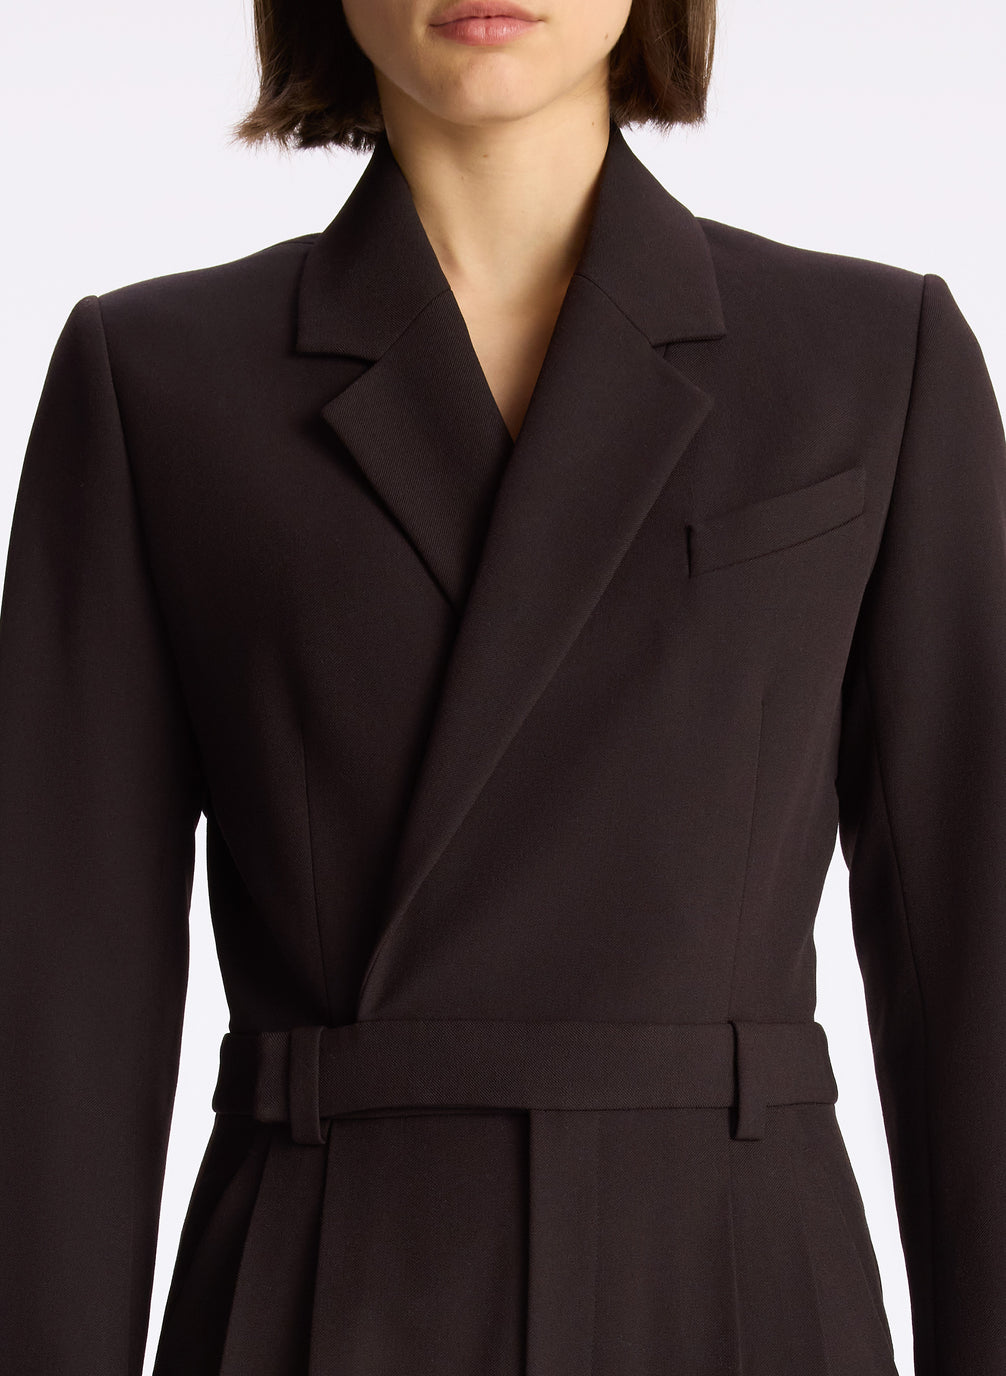 detail view of woman wearing black long sleeve jumpsuit with back cutout